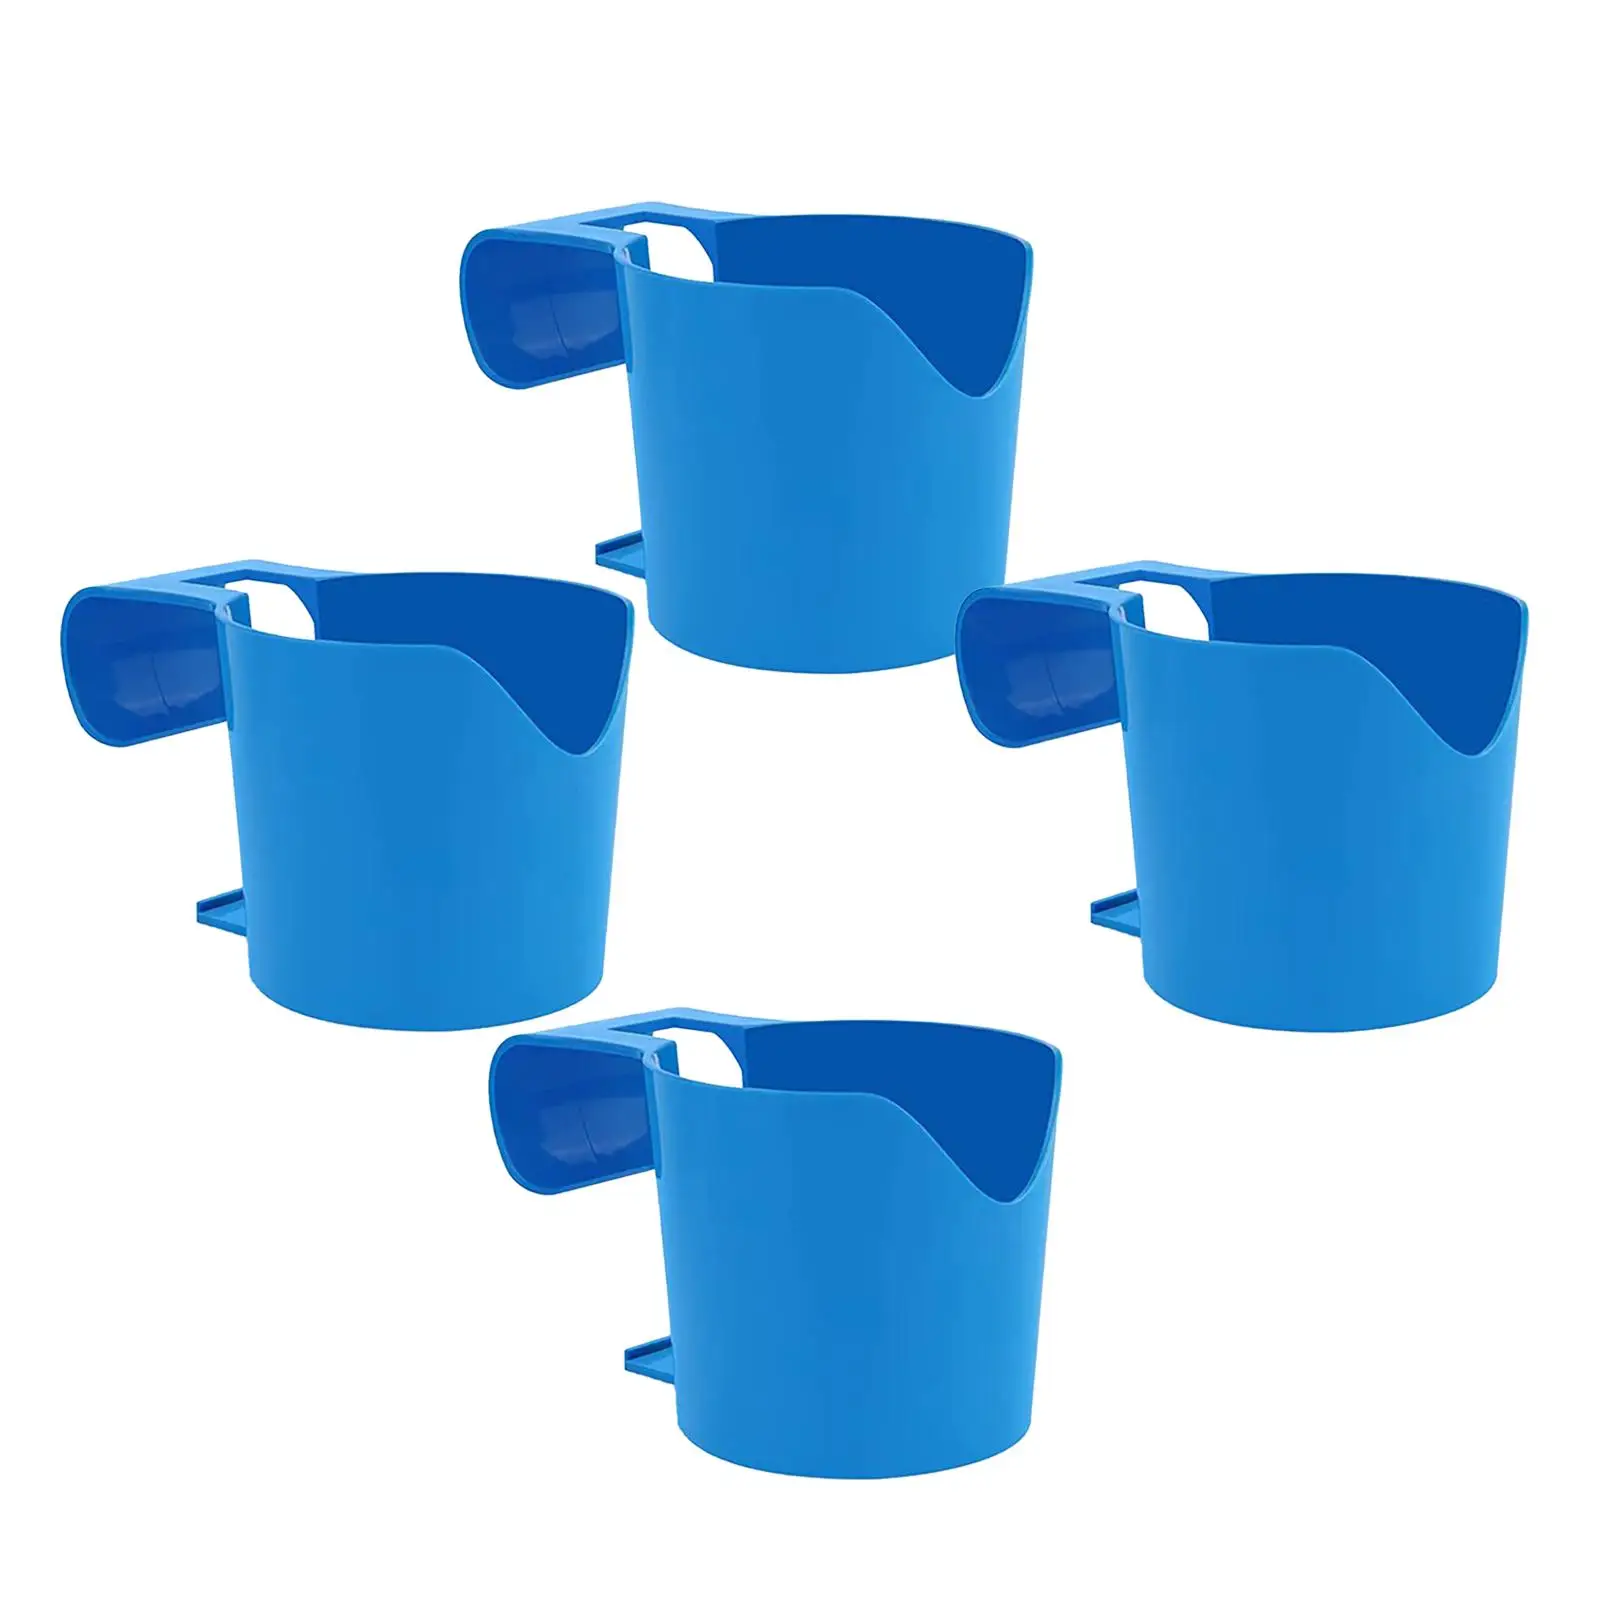 4Pcs Poolside Cup Holders Organize for above Ground Swimming Pool Pool Cup Holder for Bathtub Swimming Pool Side Beverage Beer